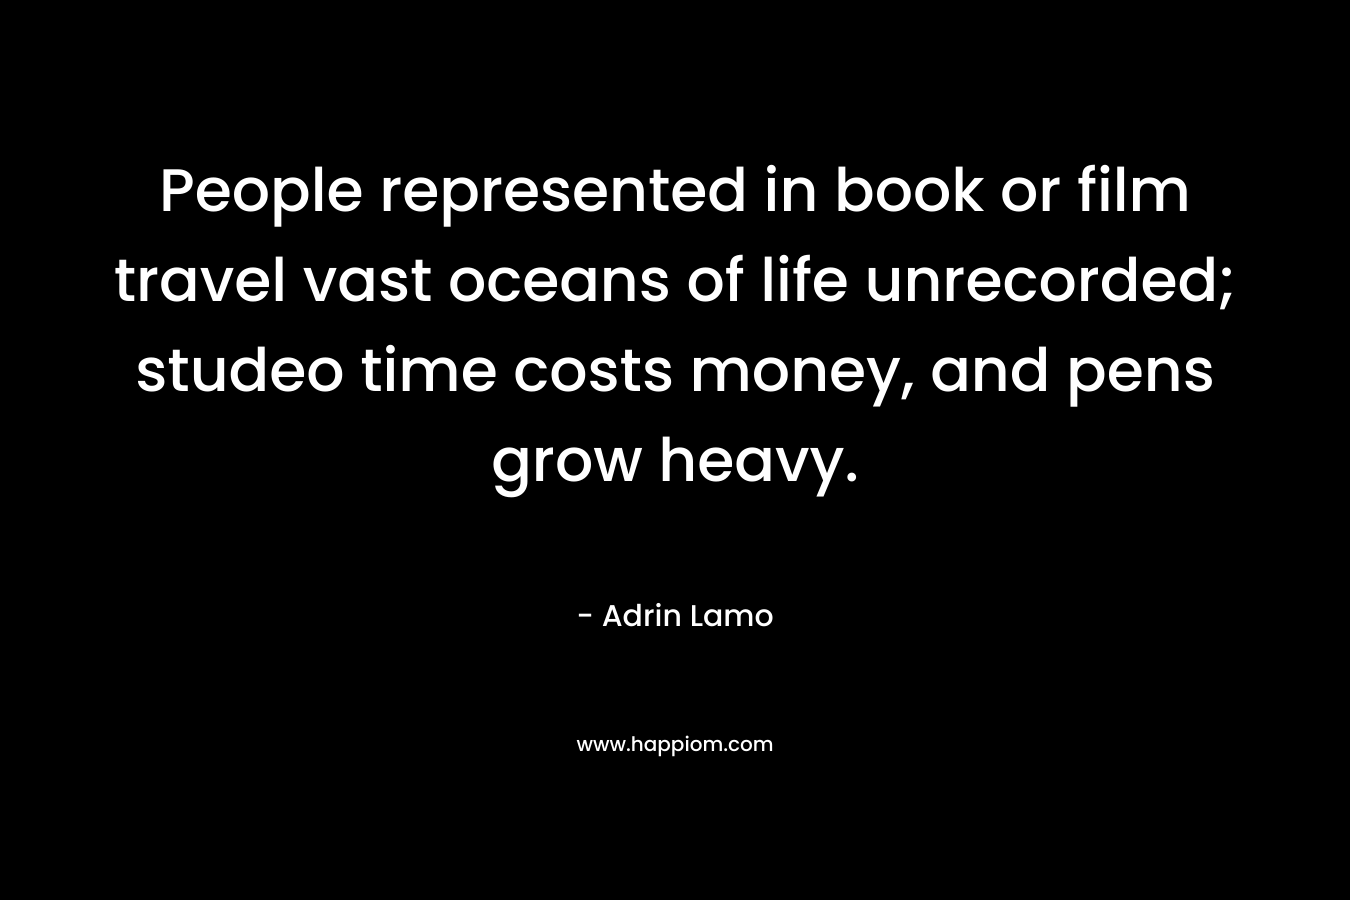 People represented in book or film travel vast oceans of life unrecorded; studeo time costs money, and pens grow heavy.